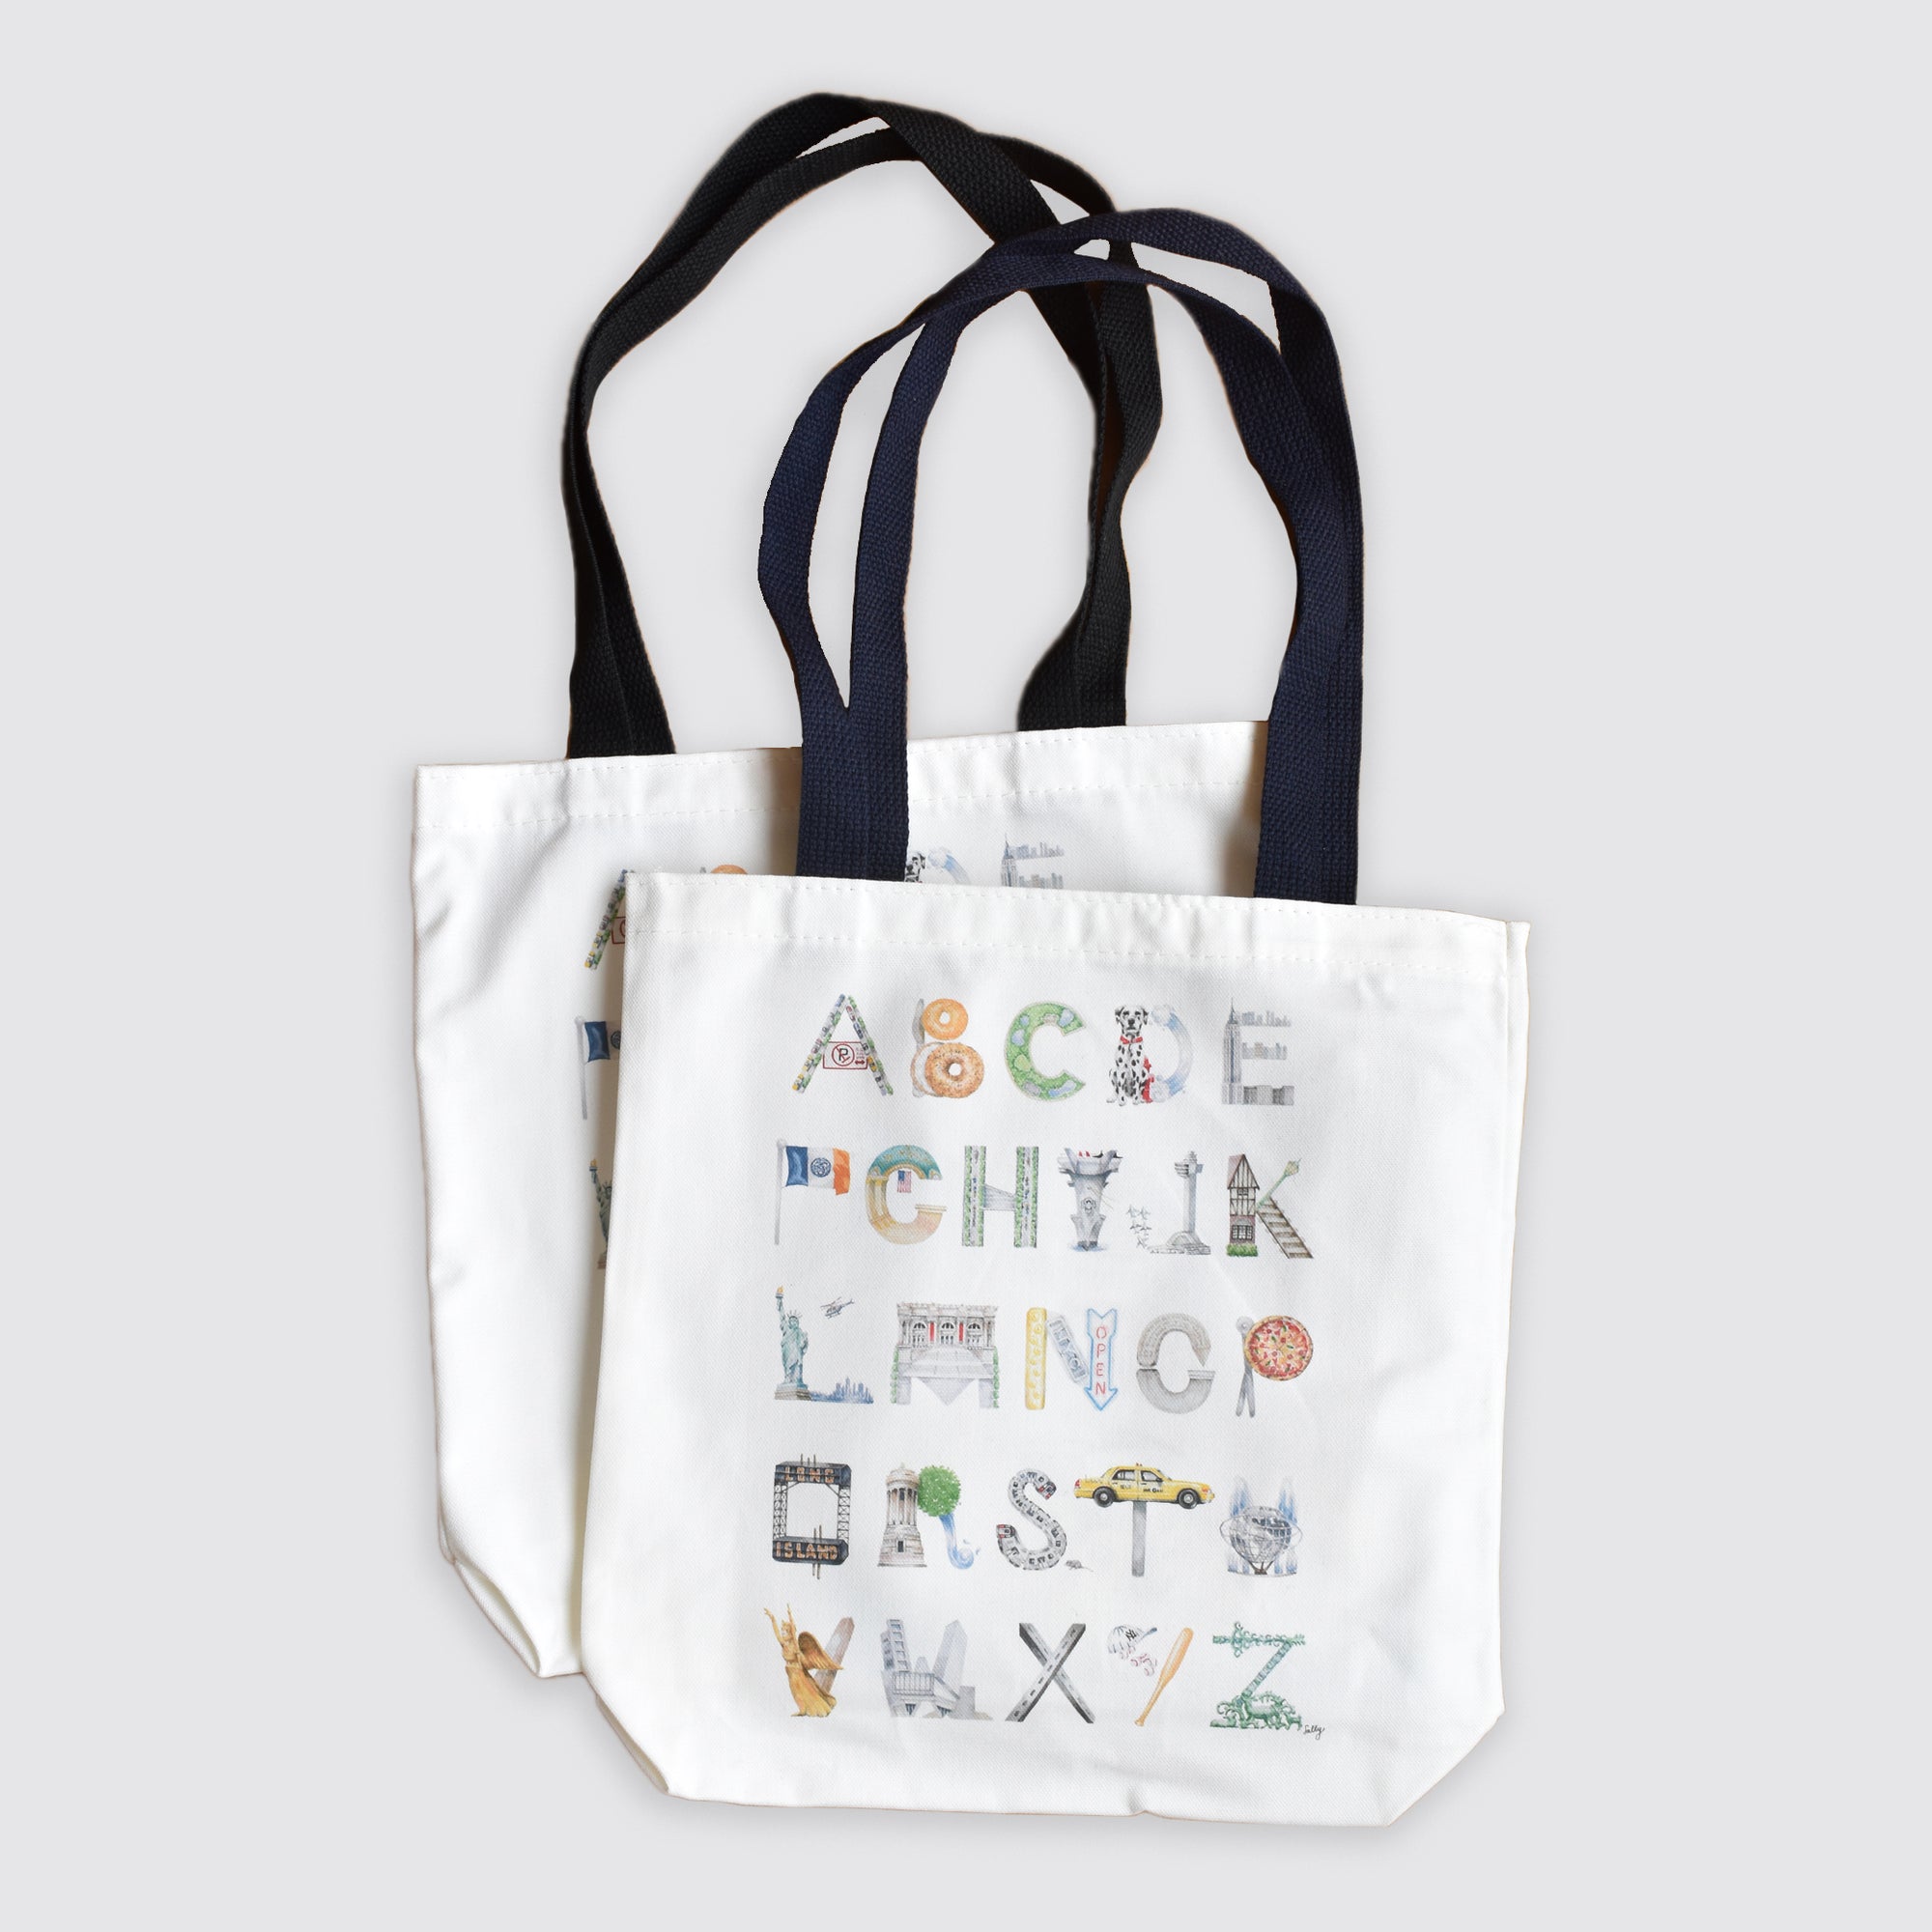 Product flat lay photo of the NYC Alphabet Tote: Black in black, navy in foreground